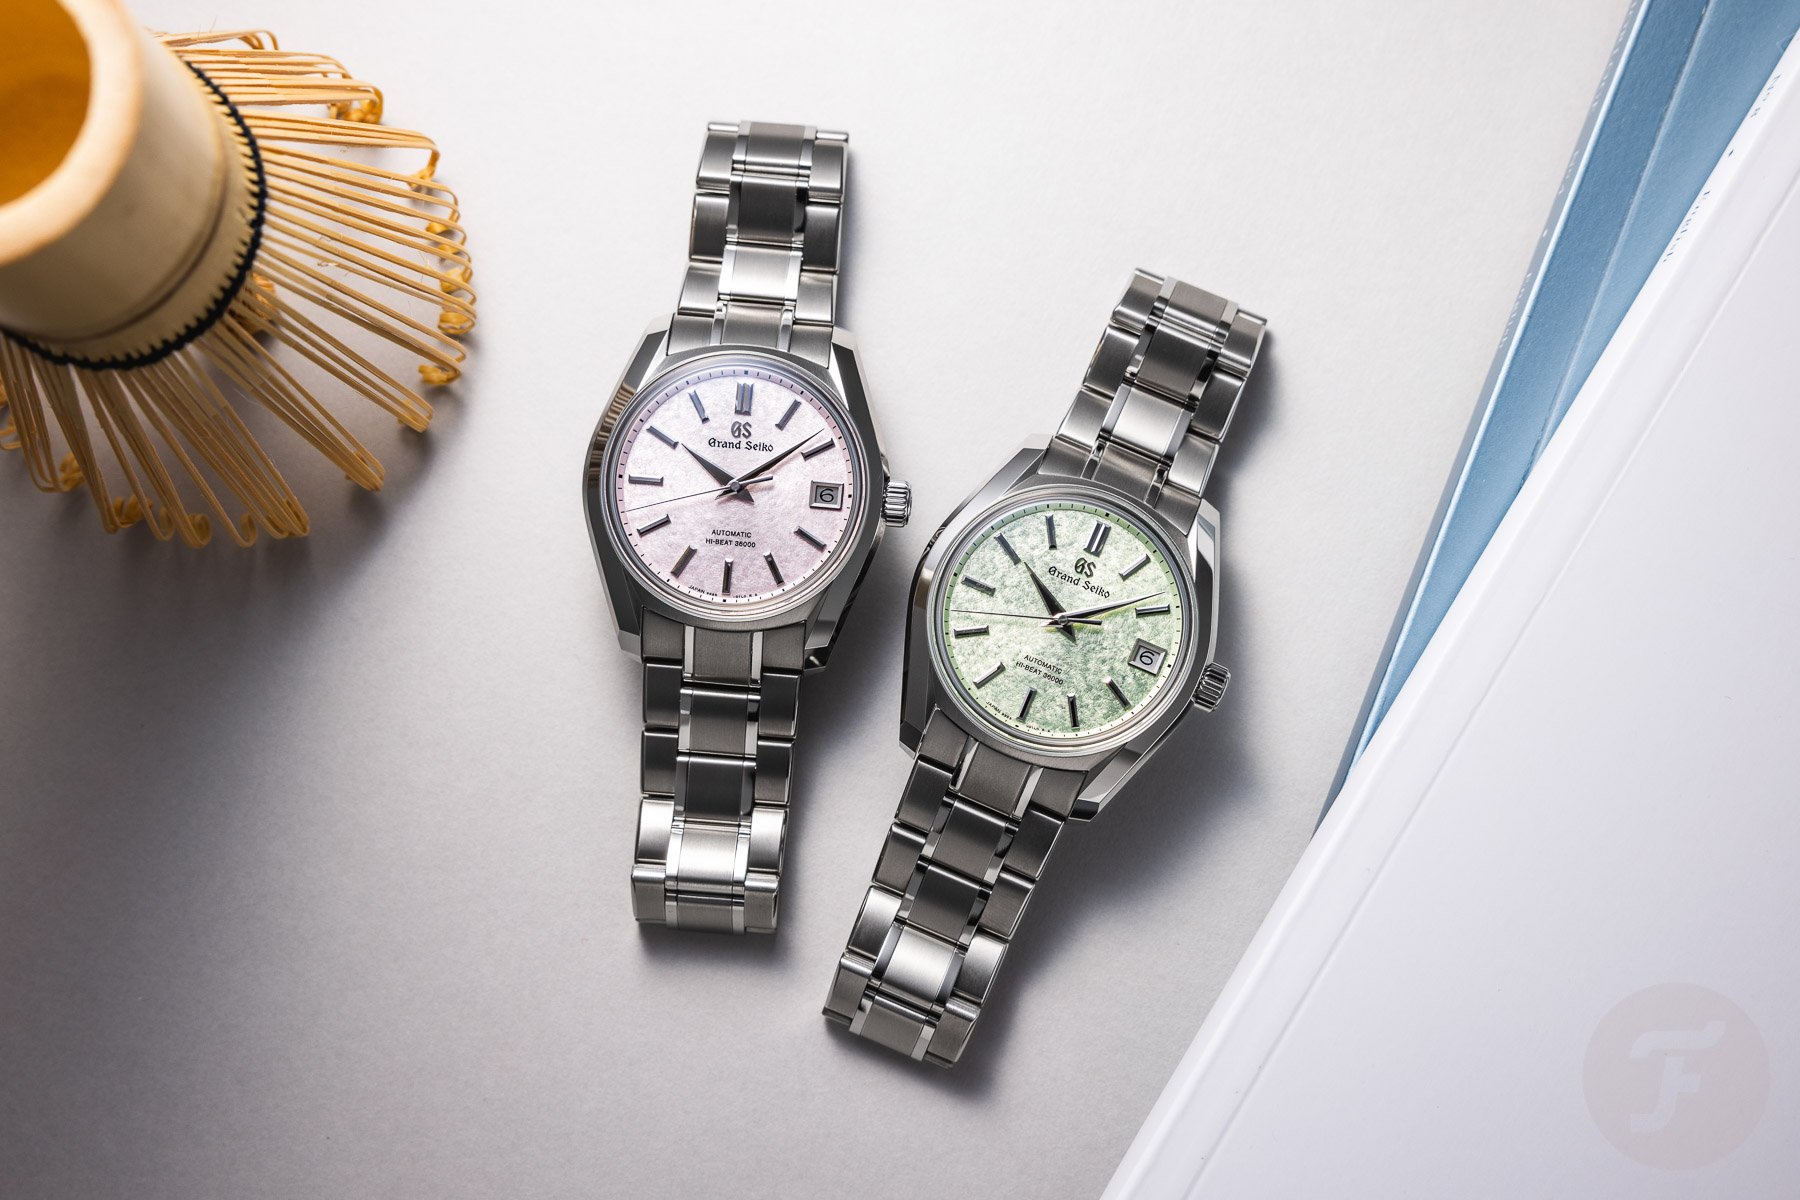 Grand Seiko Introduces The 62GS In A 38mm Size With Dials Inspired By Cherry Blossoms